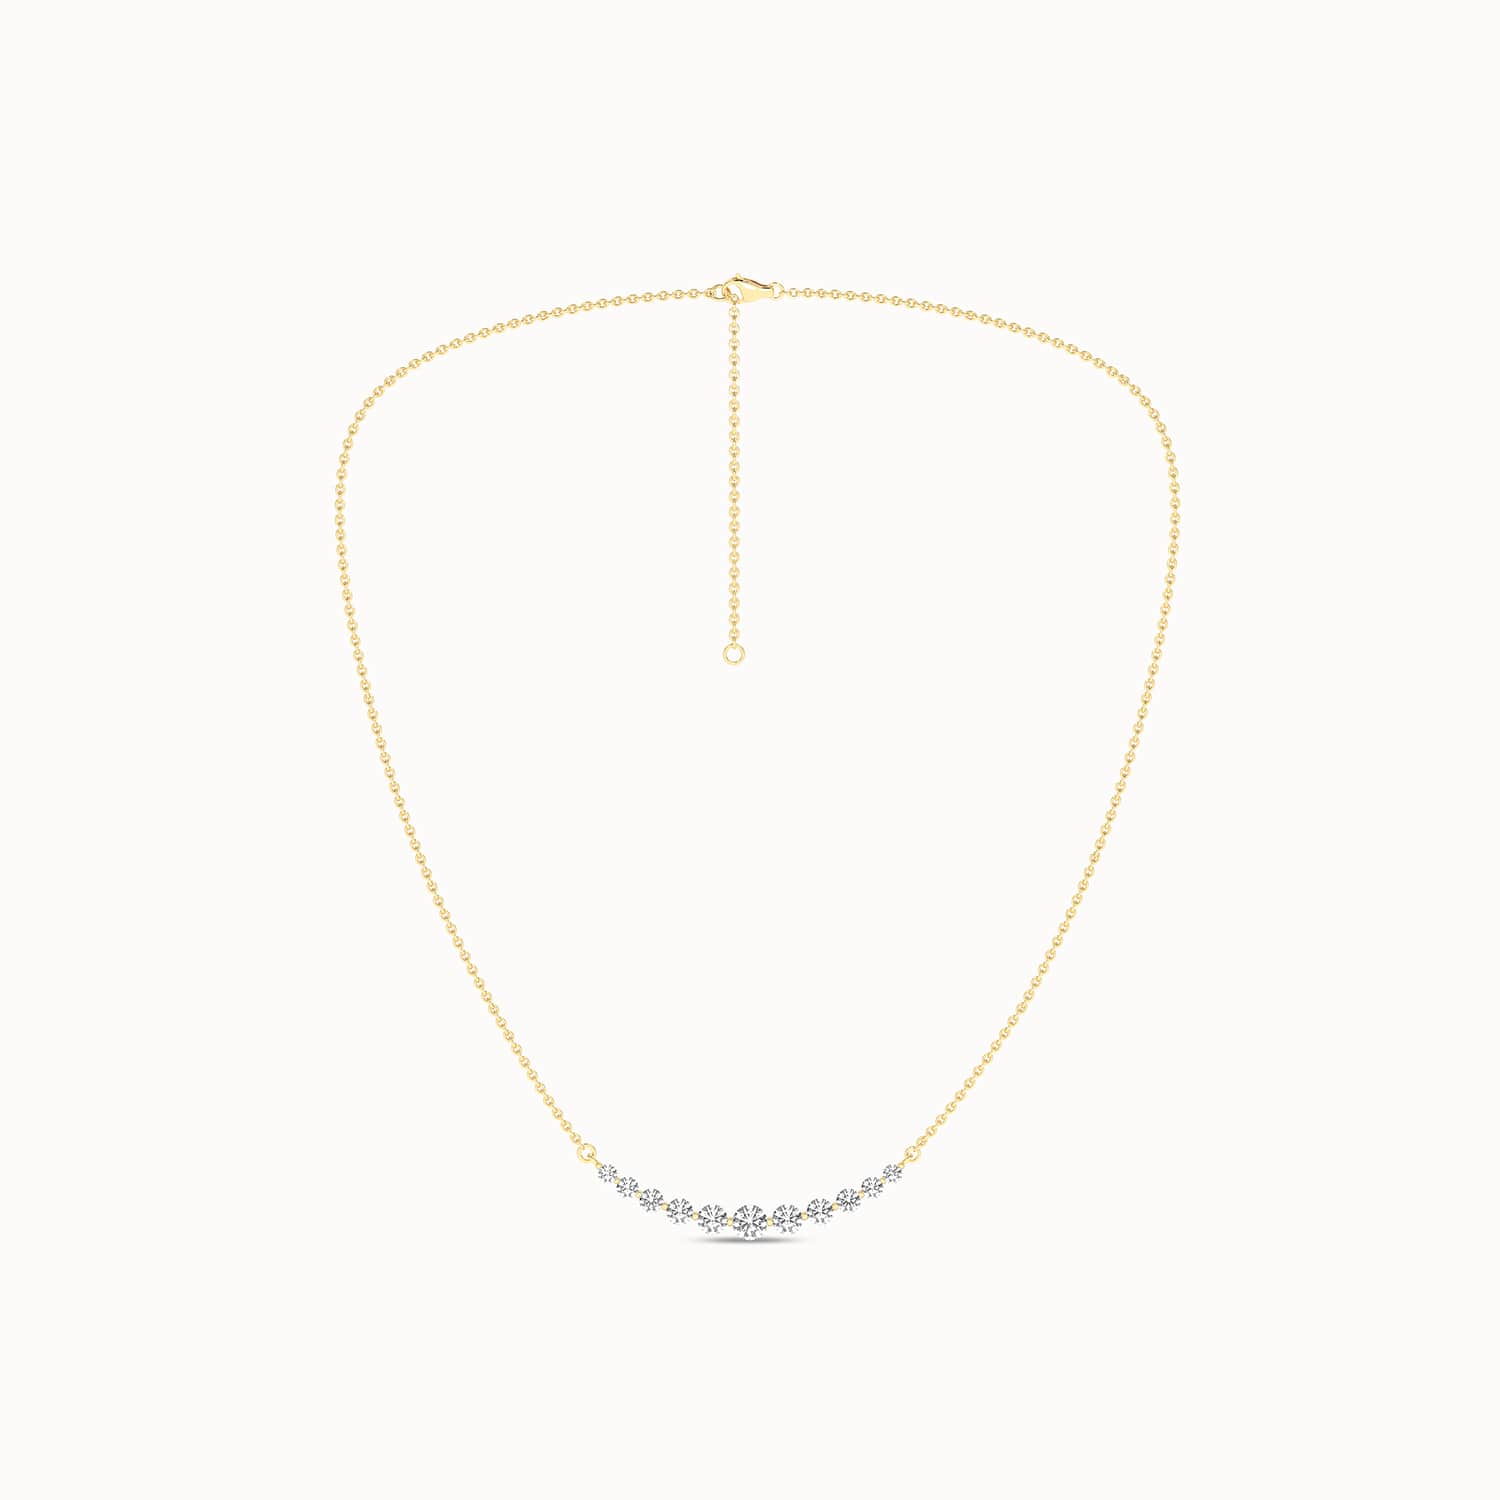 Captivating Necklace_Product Angle_1/2Ct. - 2